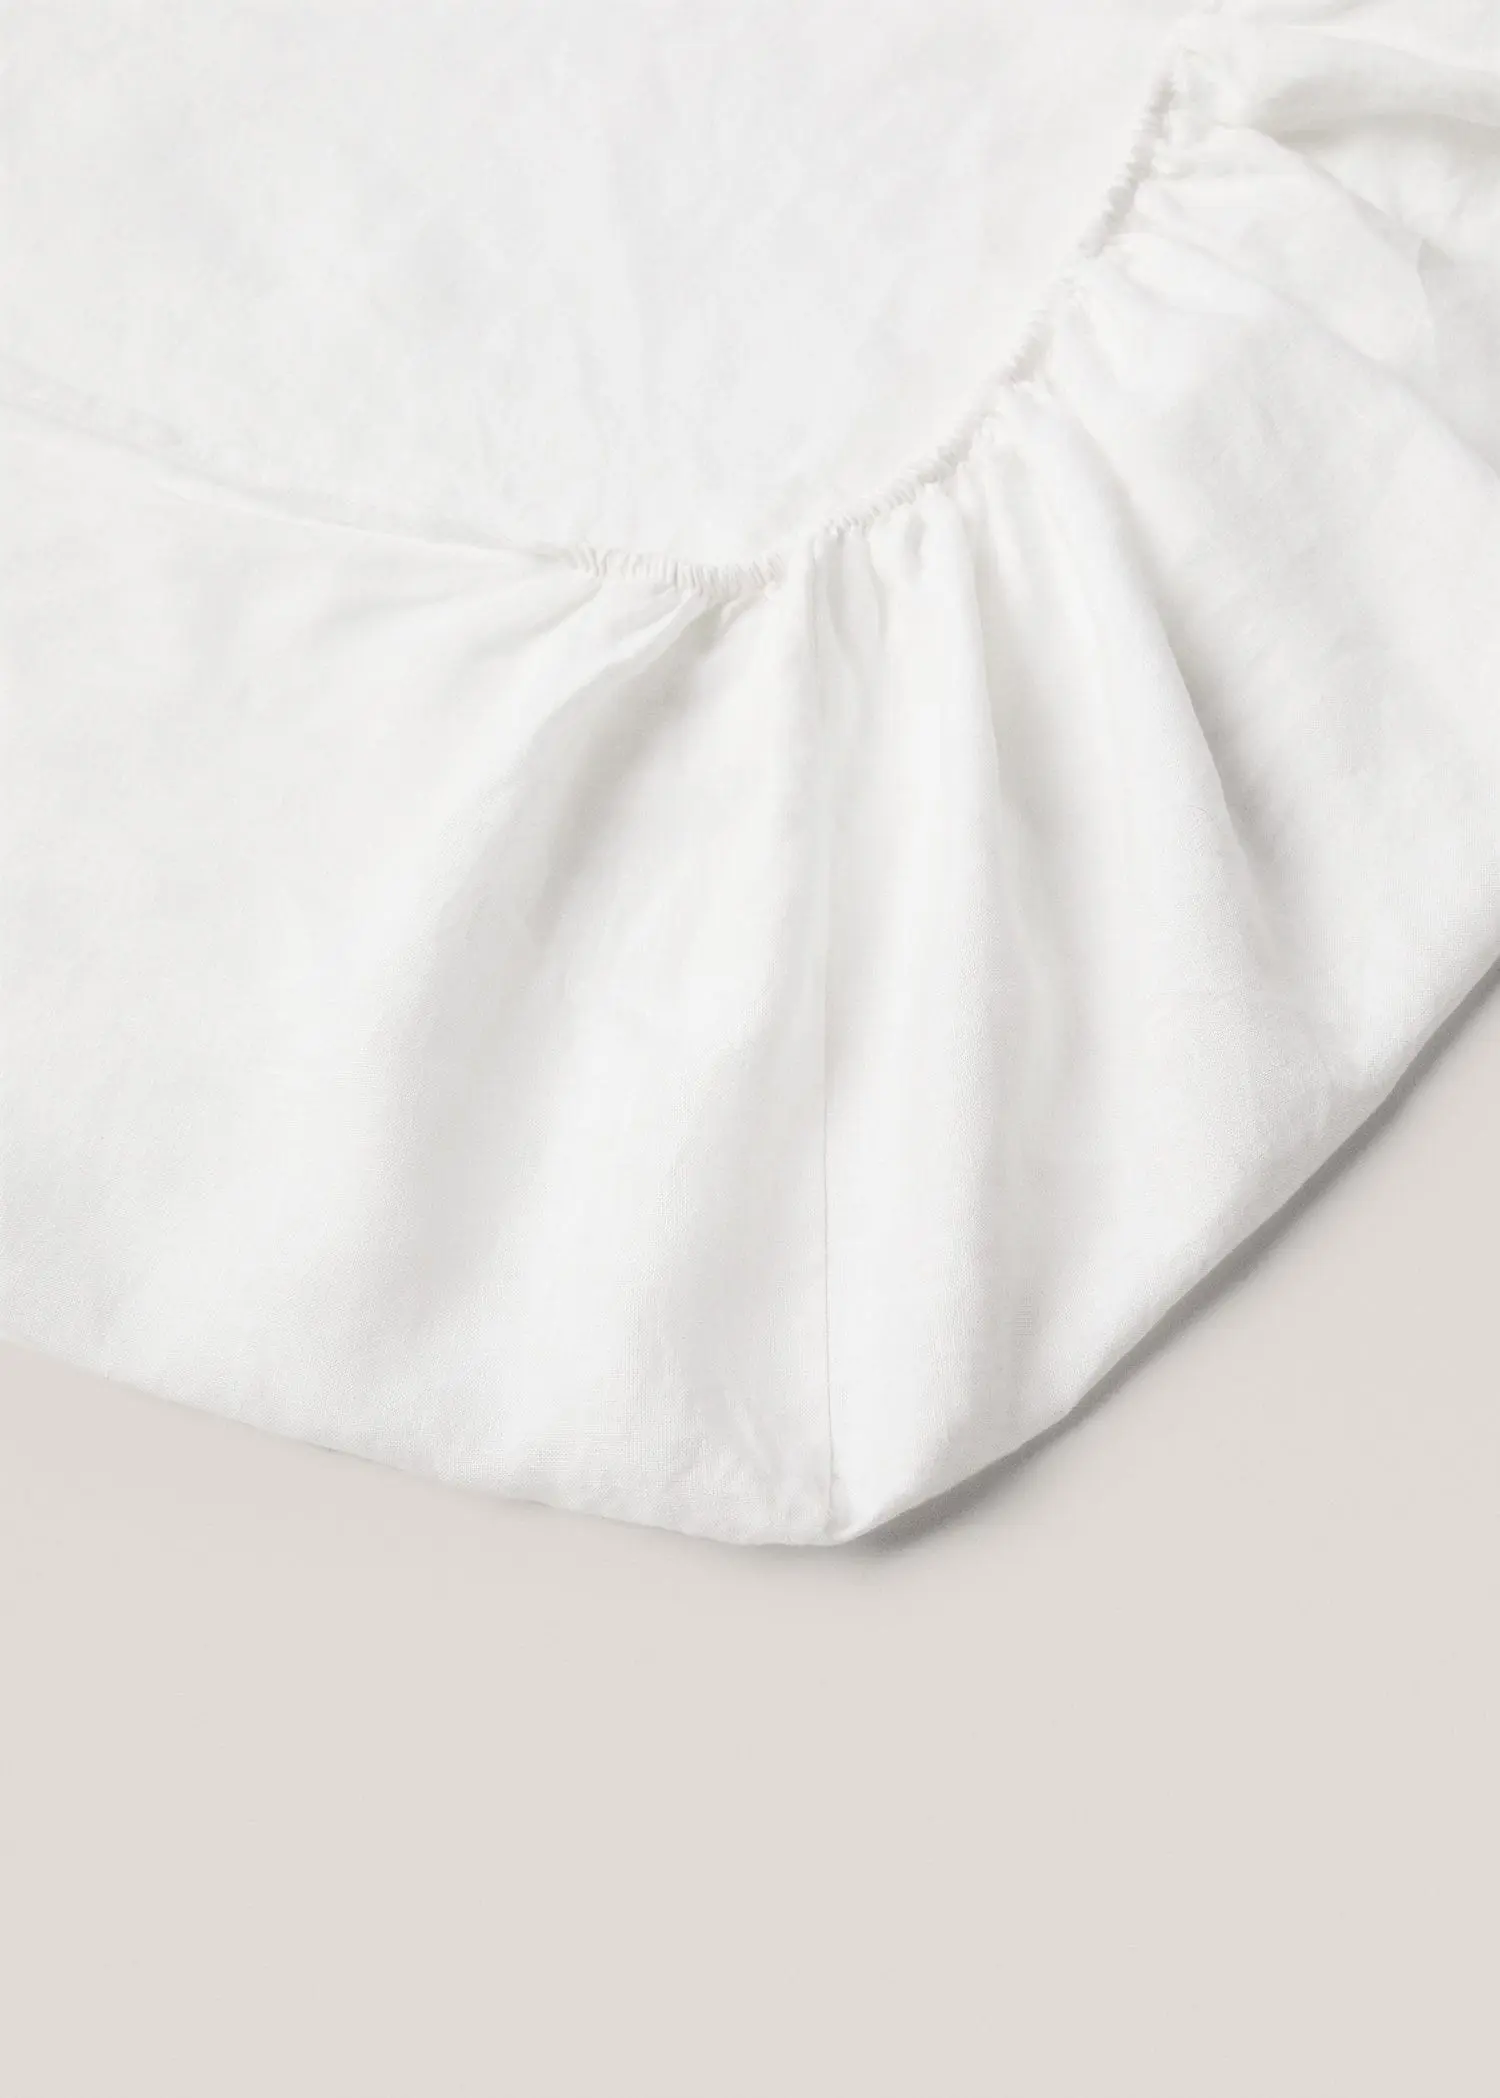 Mango 100% linen fitted sheet King bed. 2